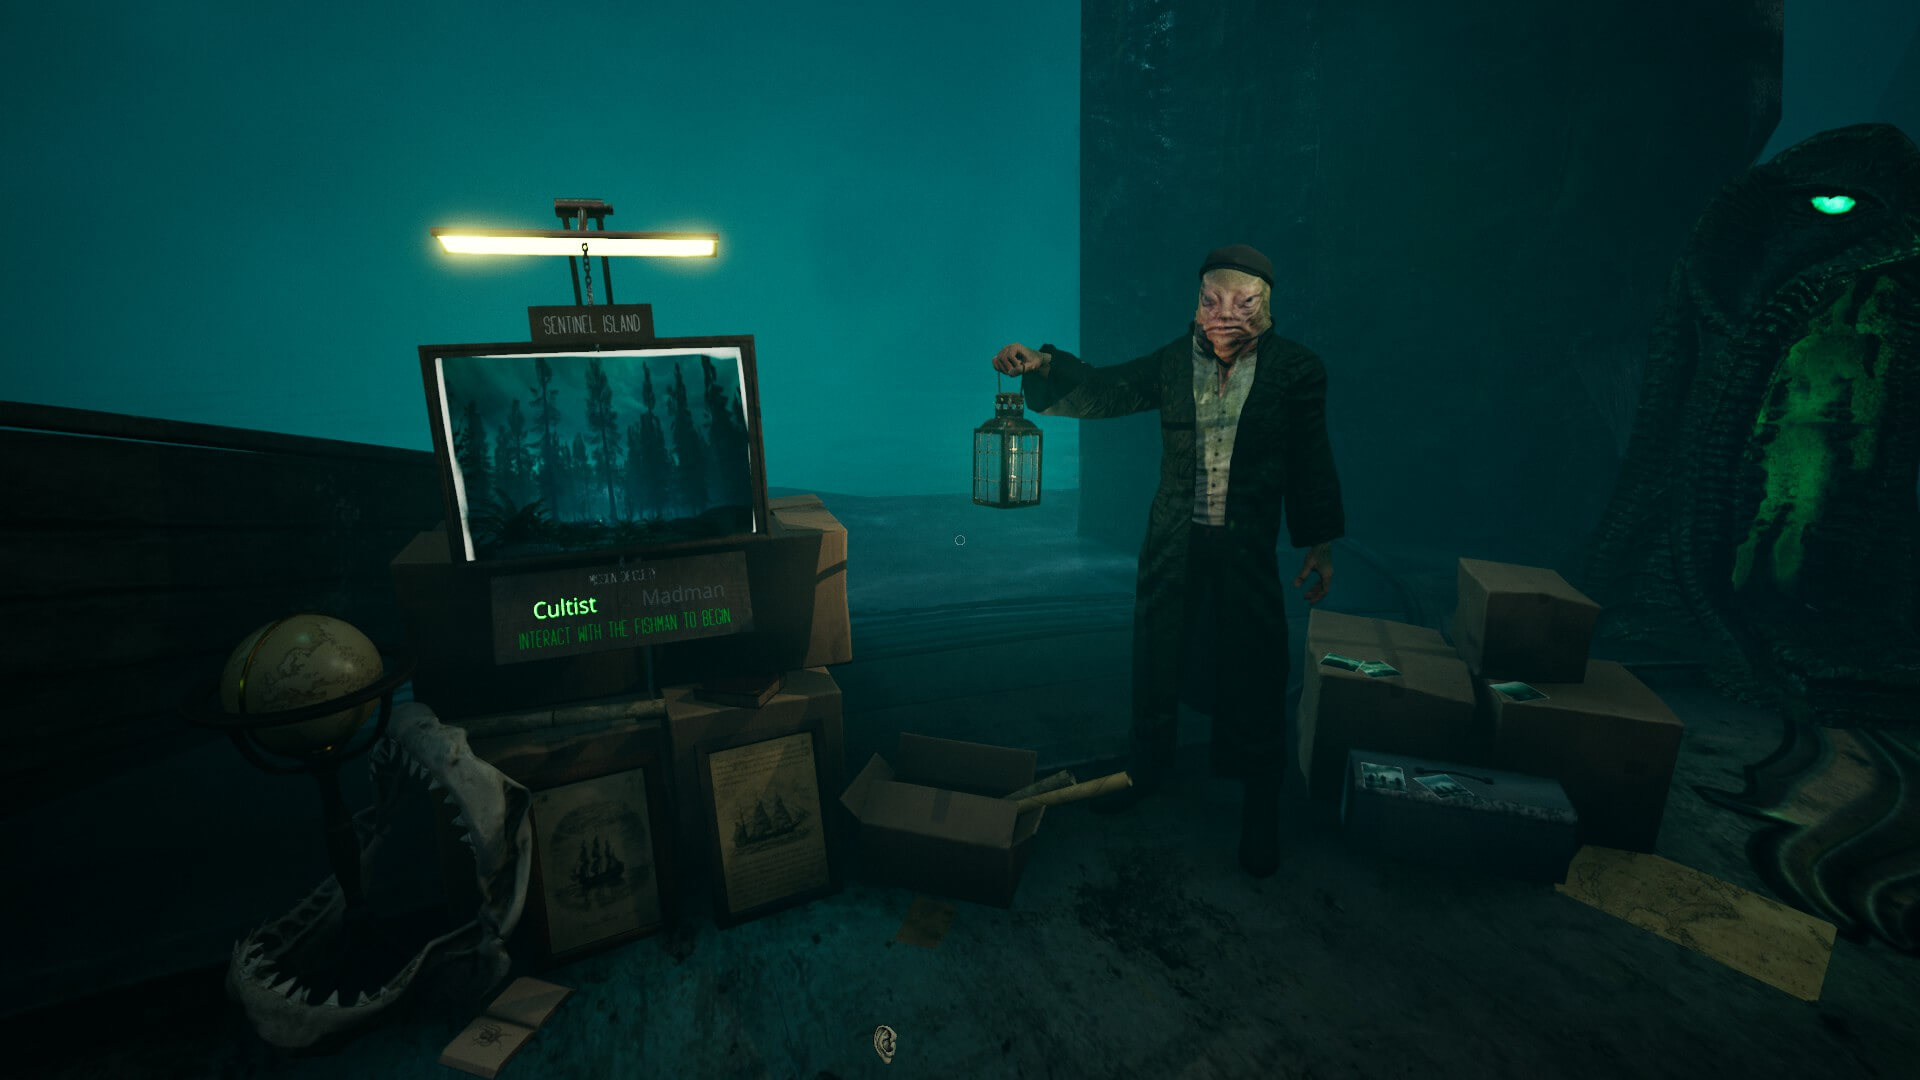 A humanoid fish holding a lanterned stands next to a plinth lit by a glowing light from above. Boxes and items are strewn at his feet